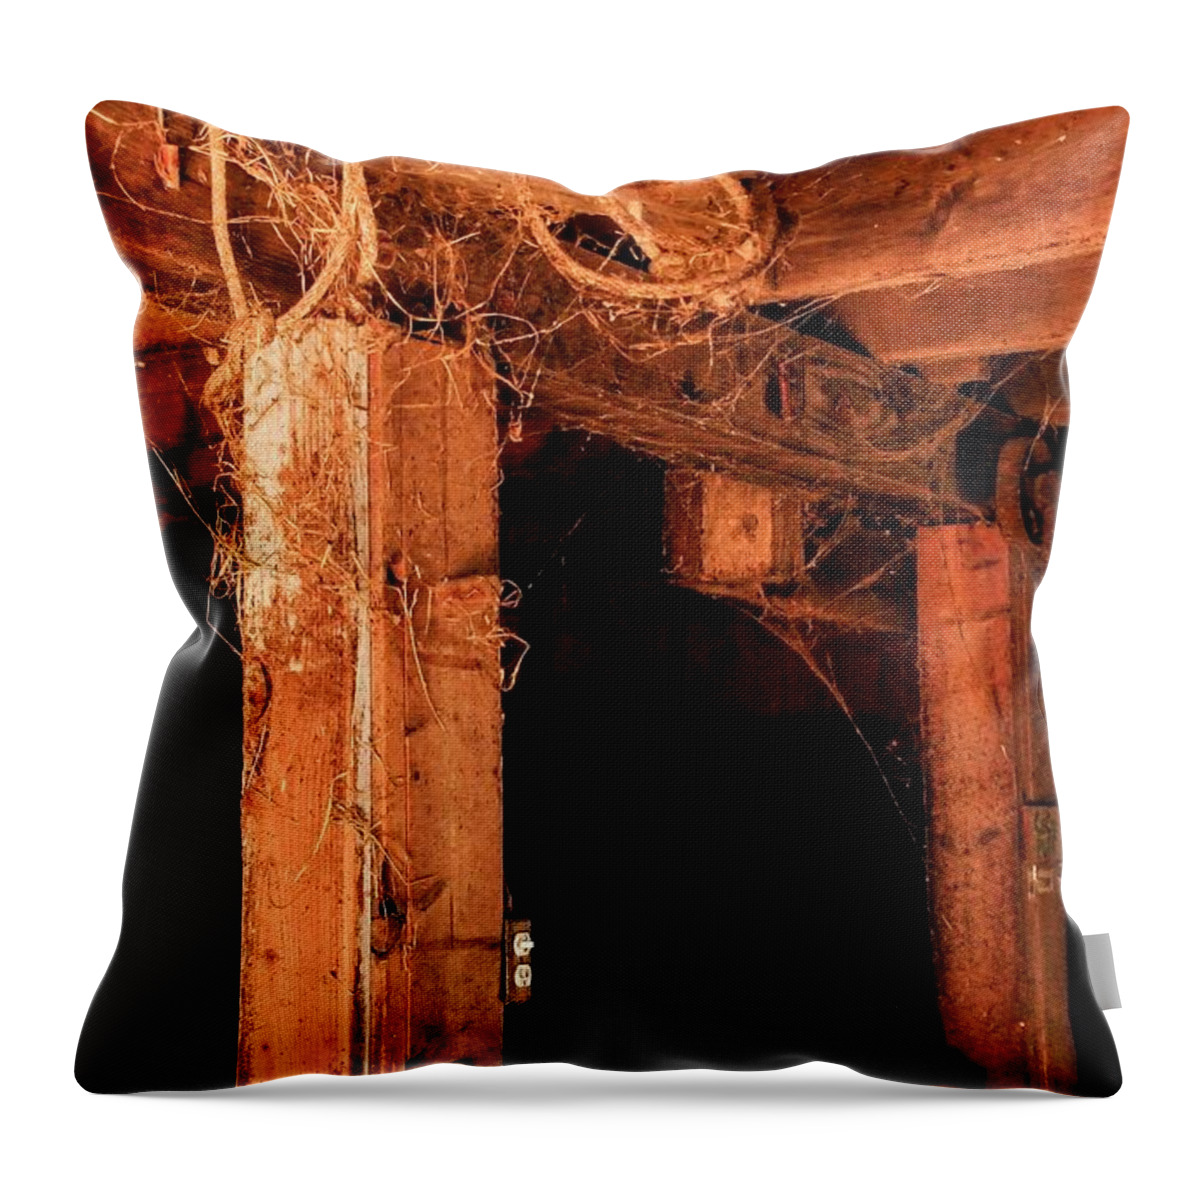 Horse Stable Wood Sepia Web Throw Pillow featuring the photograph Horse Stable by John Linnemeyer